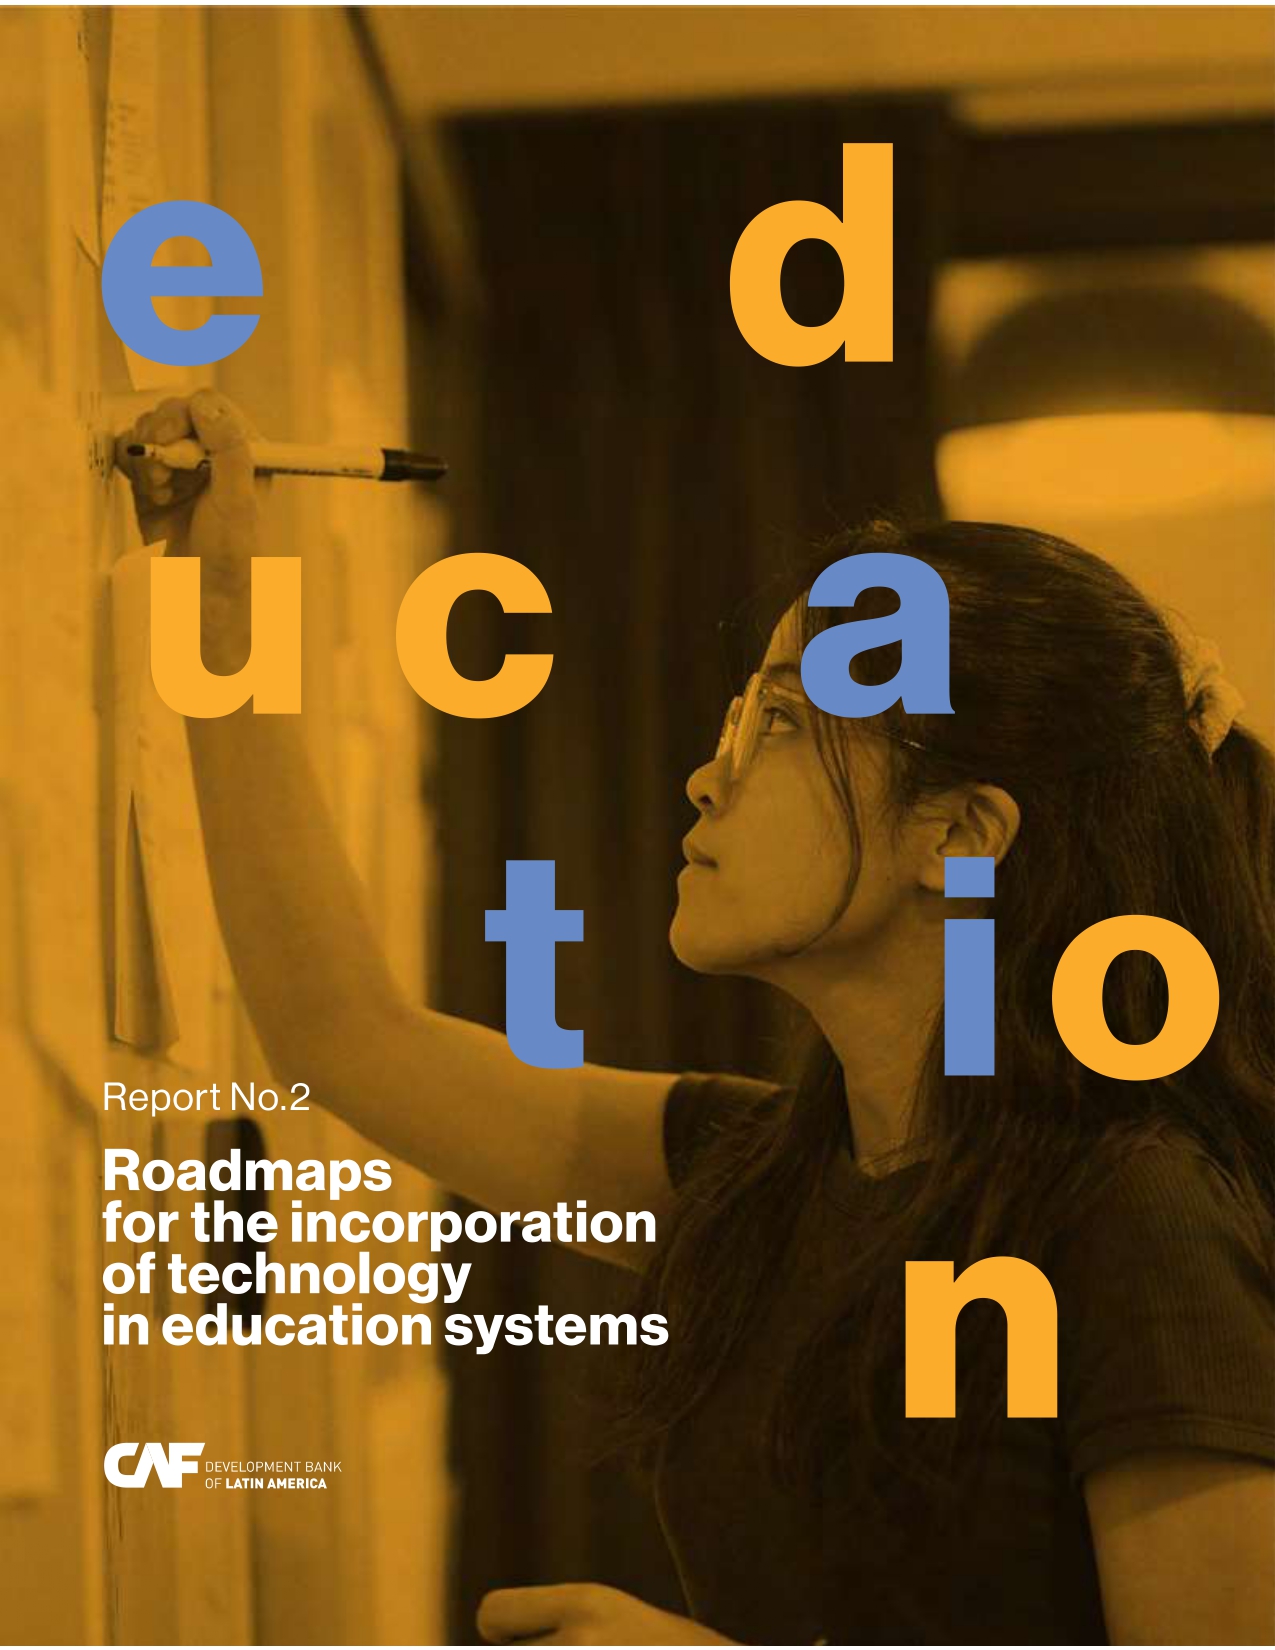 Roadmaps for the incorporation of technology in education systems